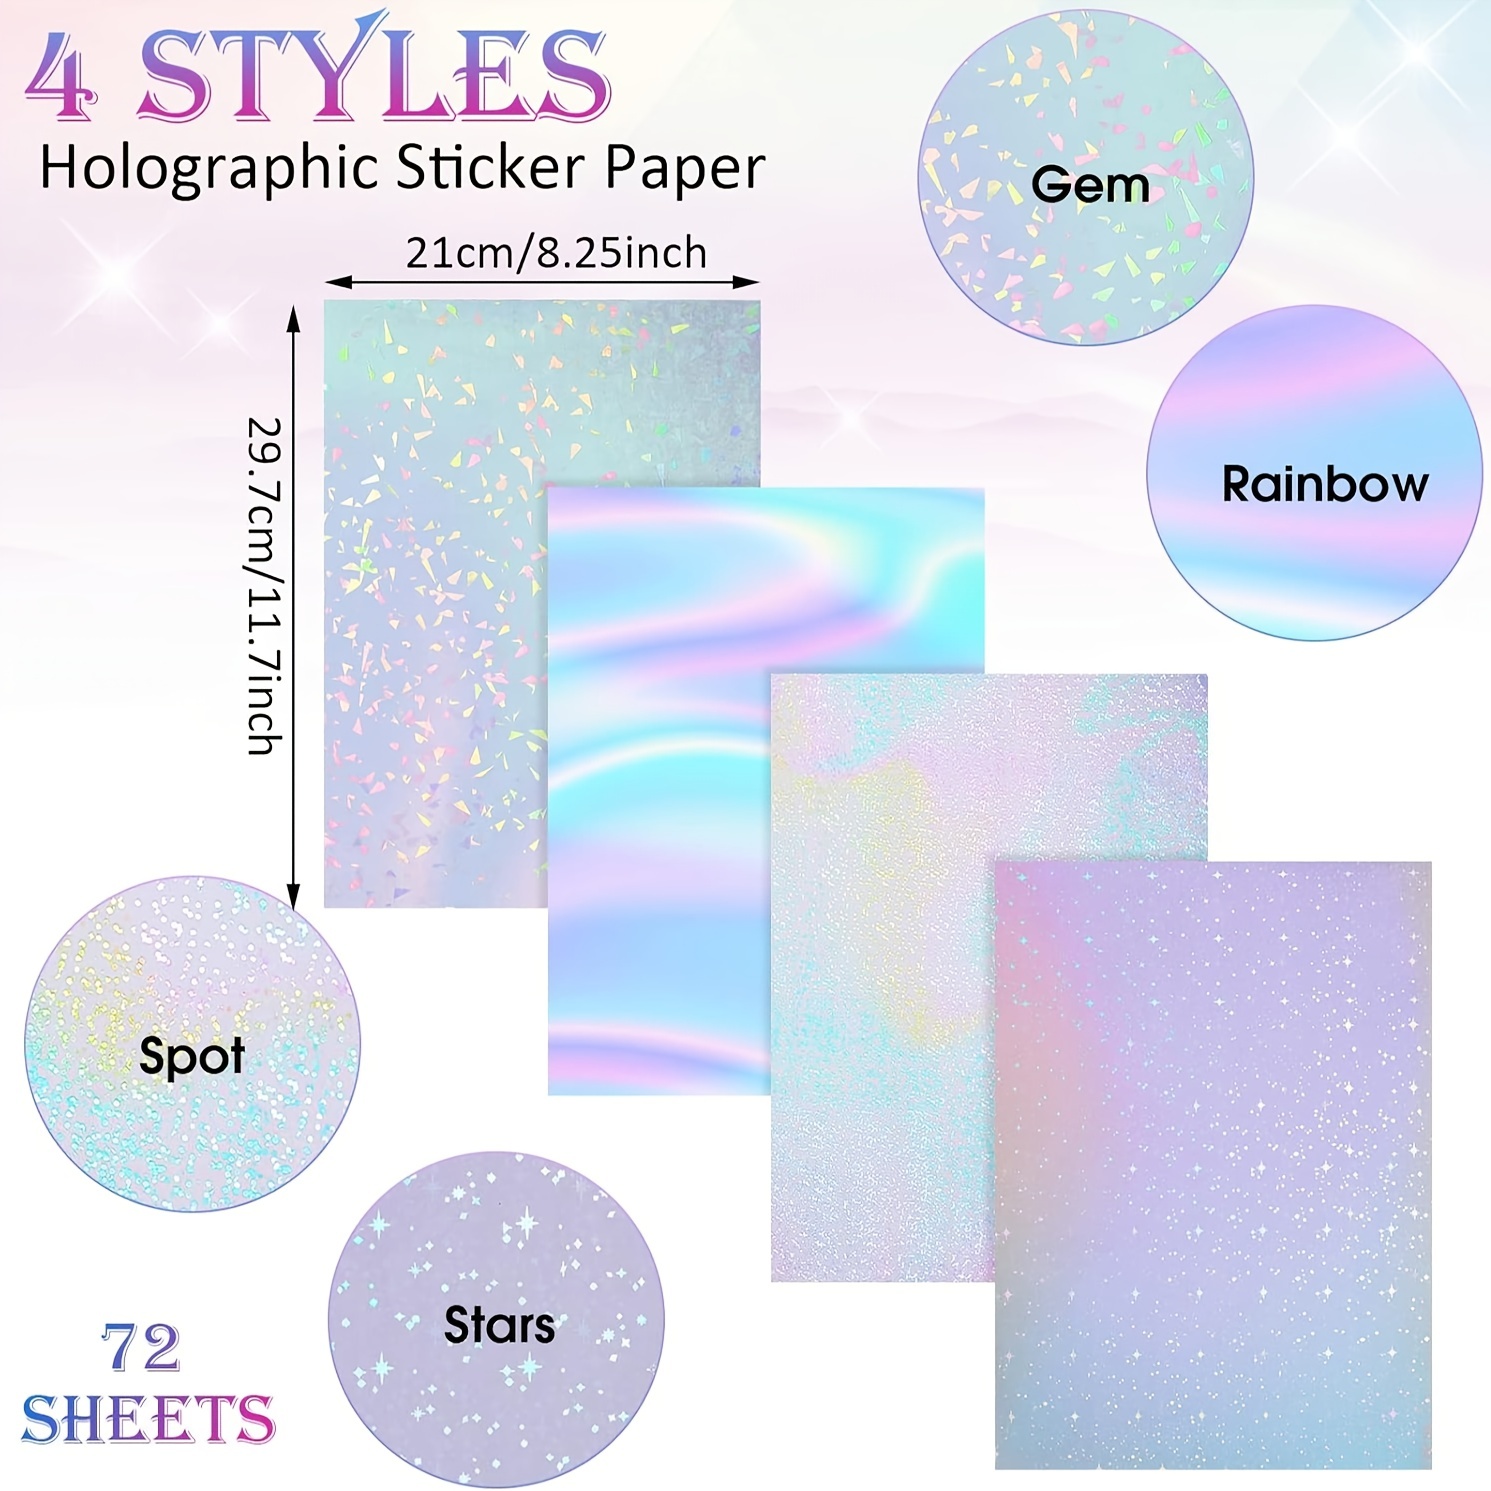 30 Sheets Holographic Laminate Film Sticker Paper, Transparent Holographic  Vinyl, Clear Overlay Lamination Sticker Paper Self Adhesive Waterproof